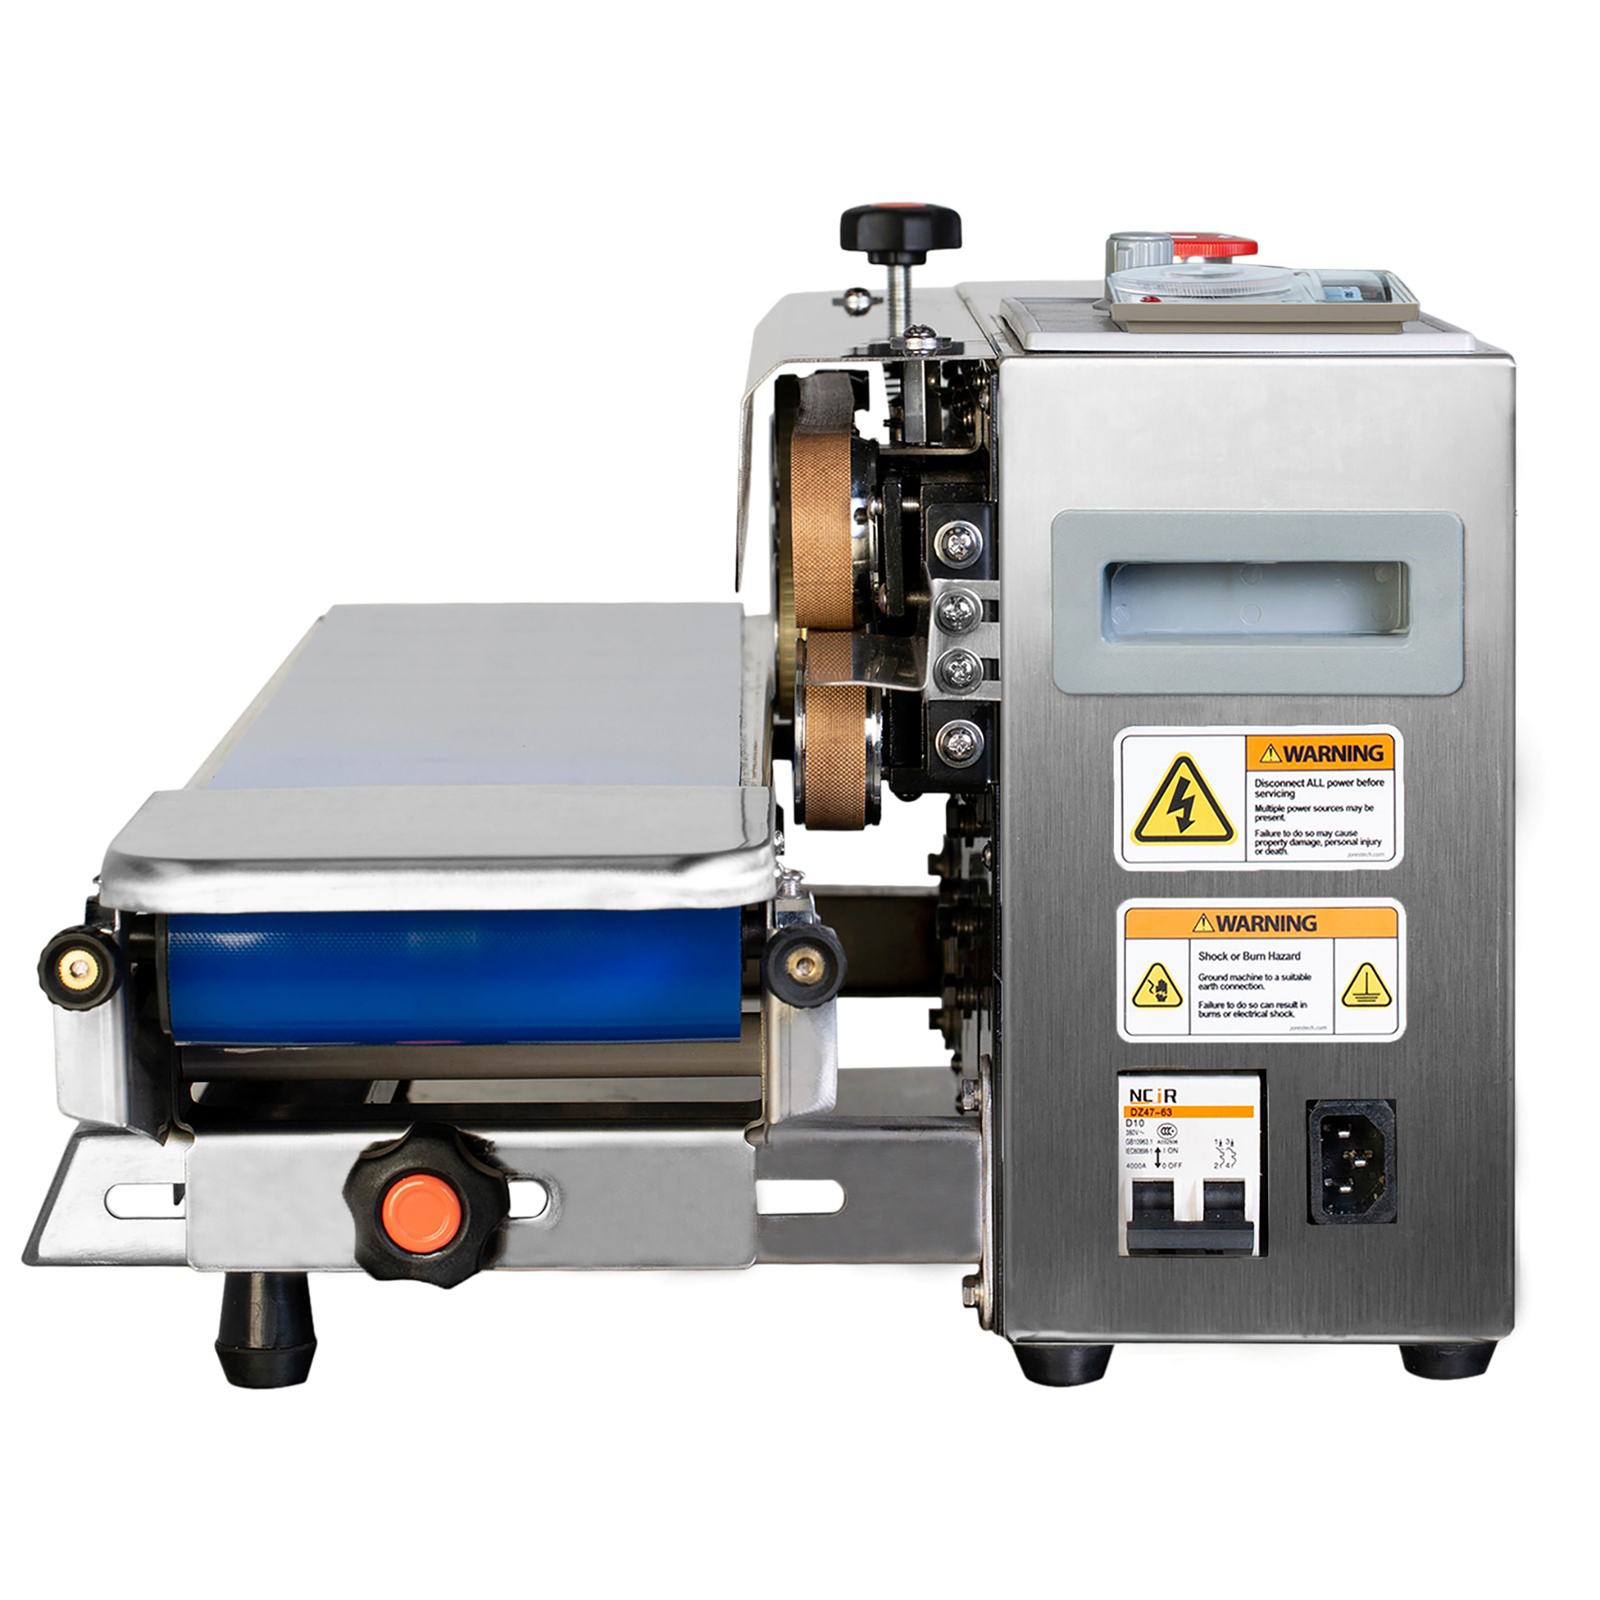 side view of the JORESTECH stainless steel jorestech horizontal and vertical continuous band sealing machine with blue band set for horizontal application